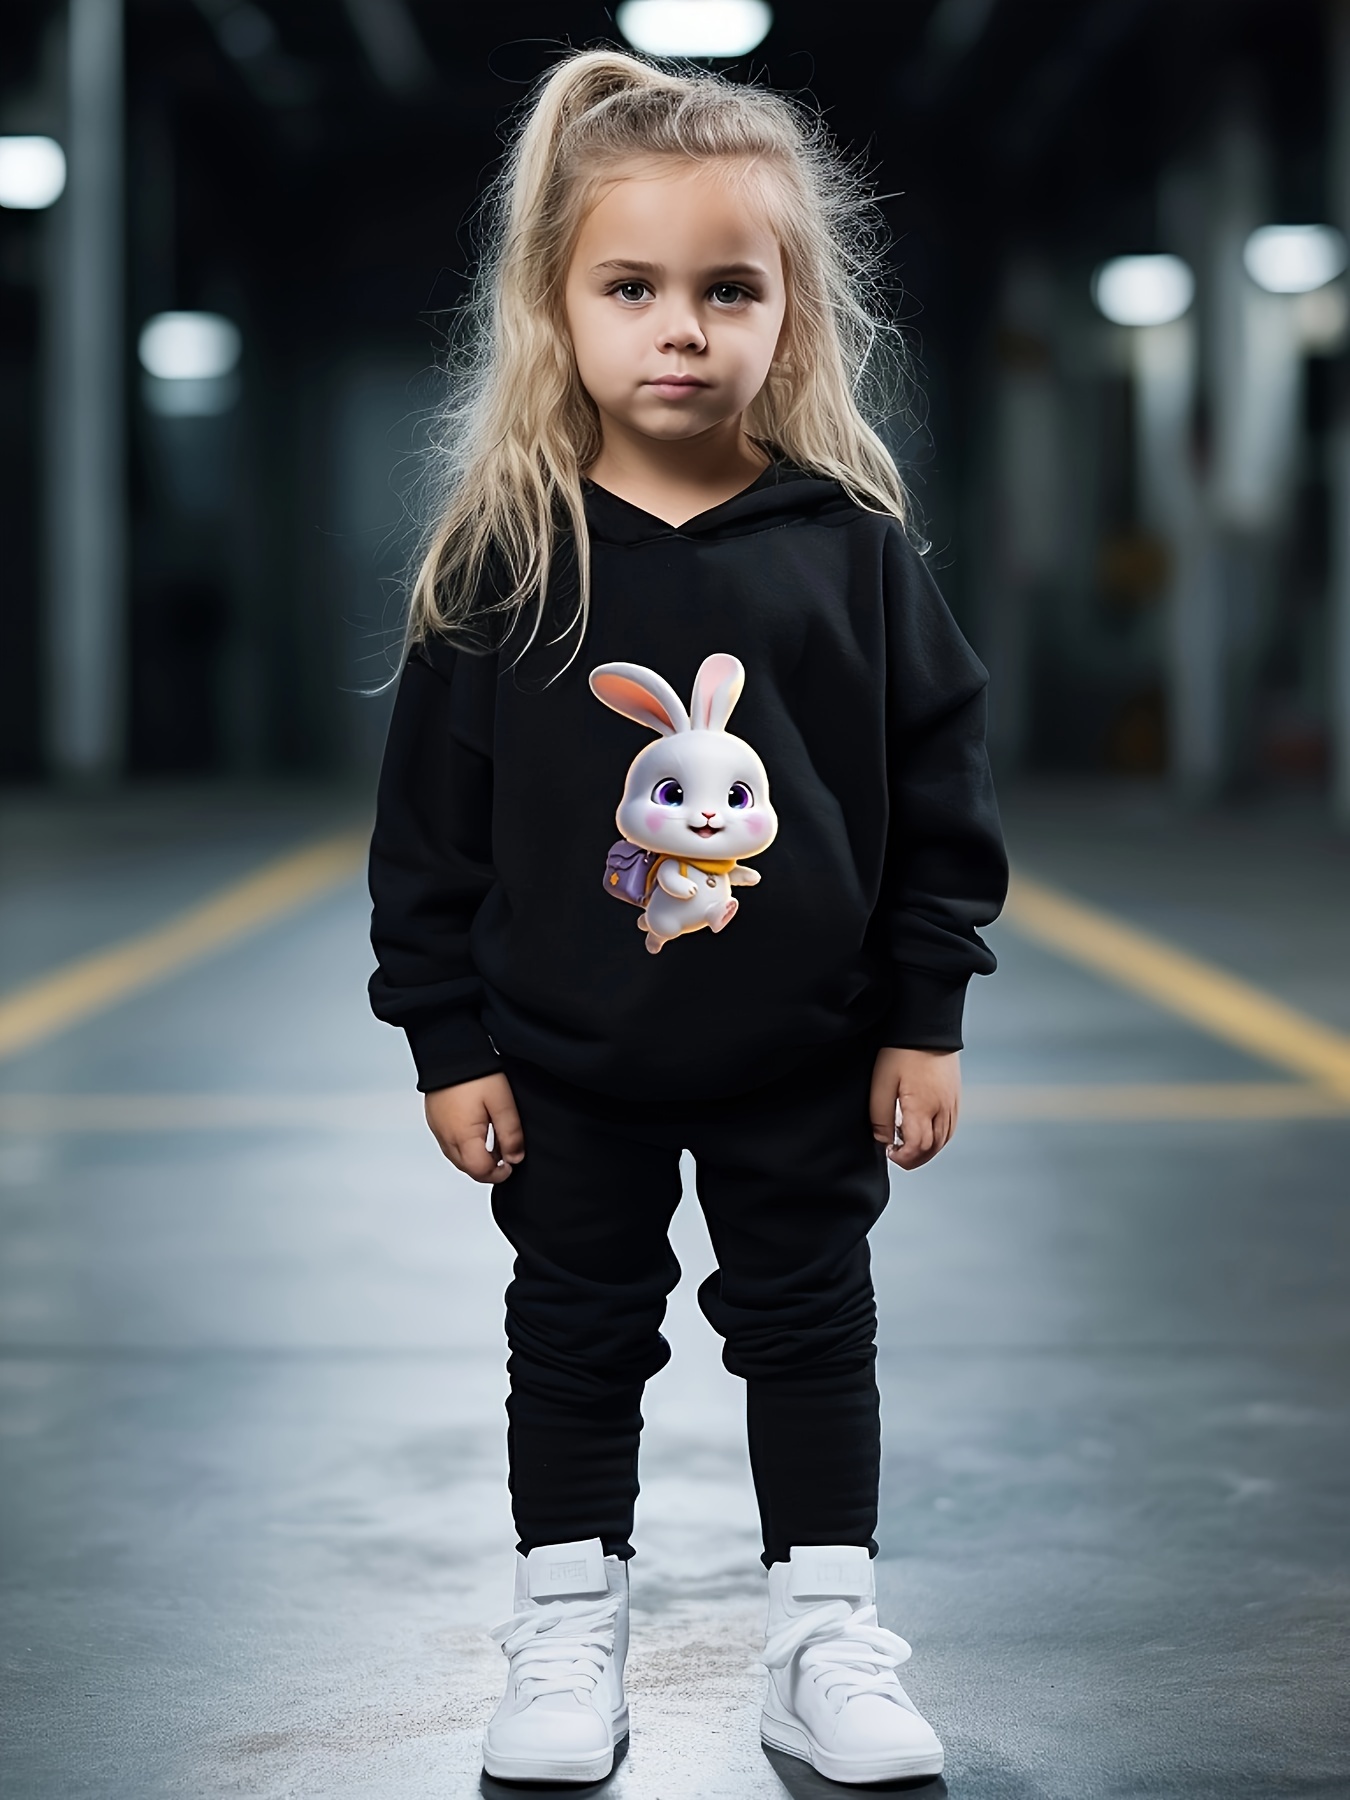 NEW YORK Embroidered Girl's 2pcs, Hoodie & Sweatpants Set, Trendy Outfits,  Kids Clothes For Spring Fall